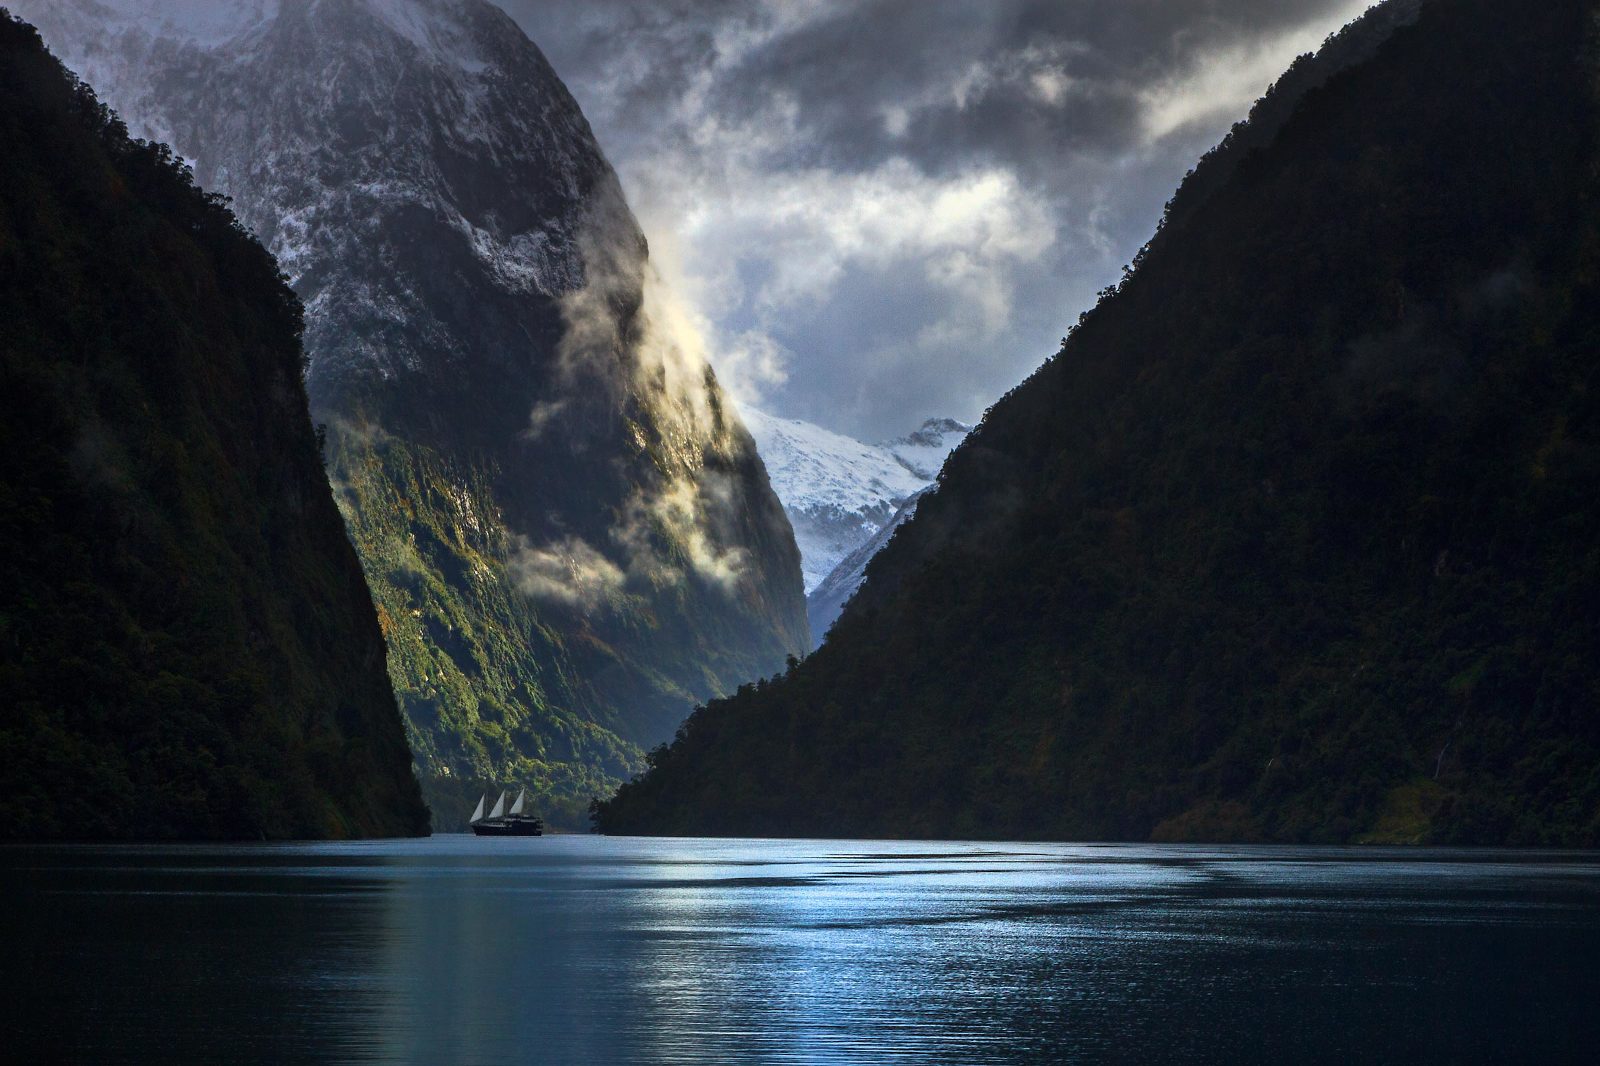 A ship with 3 sails is dwarfed by the immensity of the mountains at Doubtful Sound, New Zealand